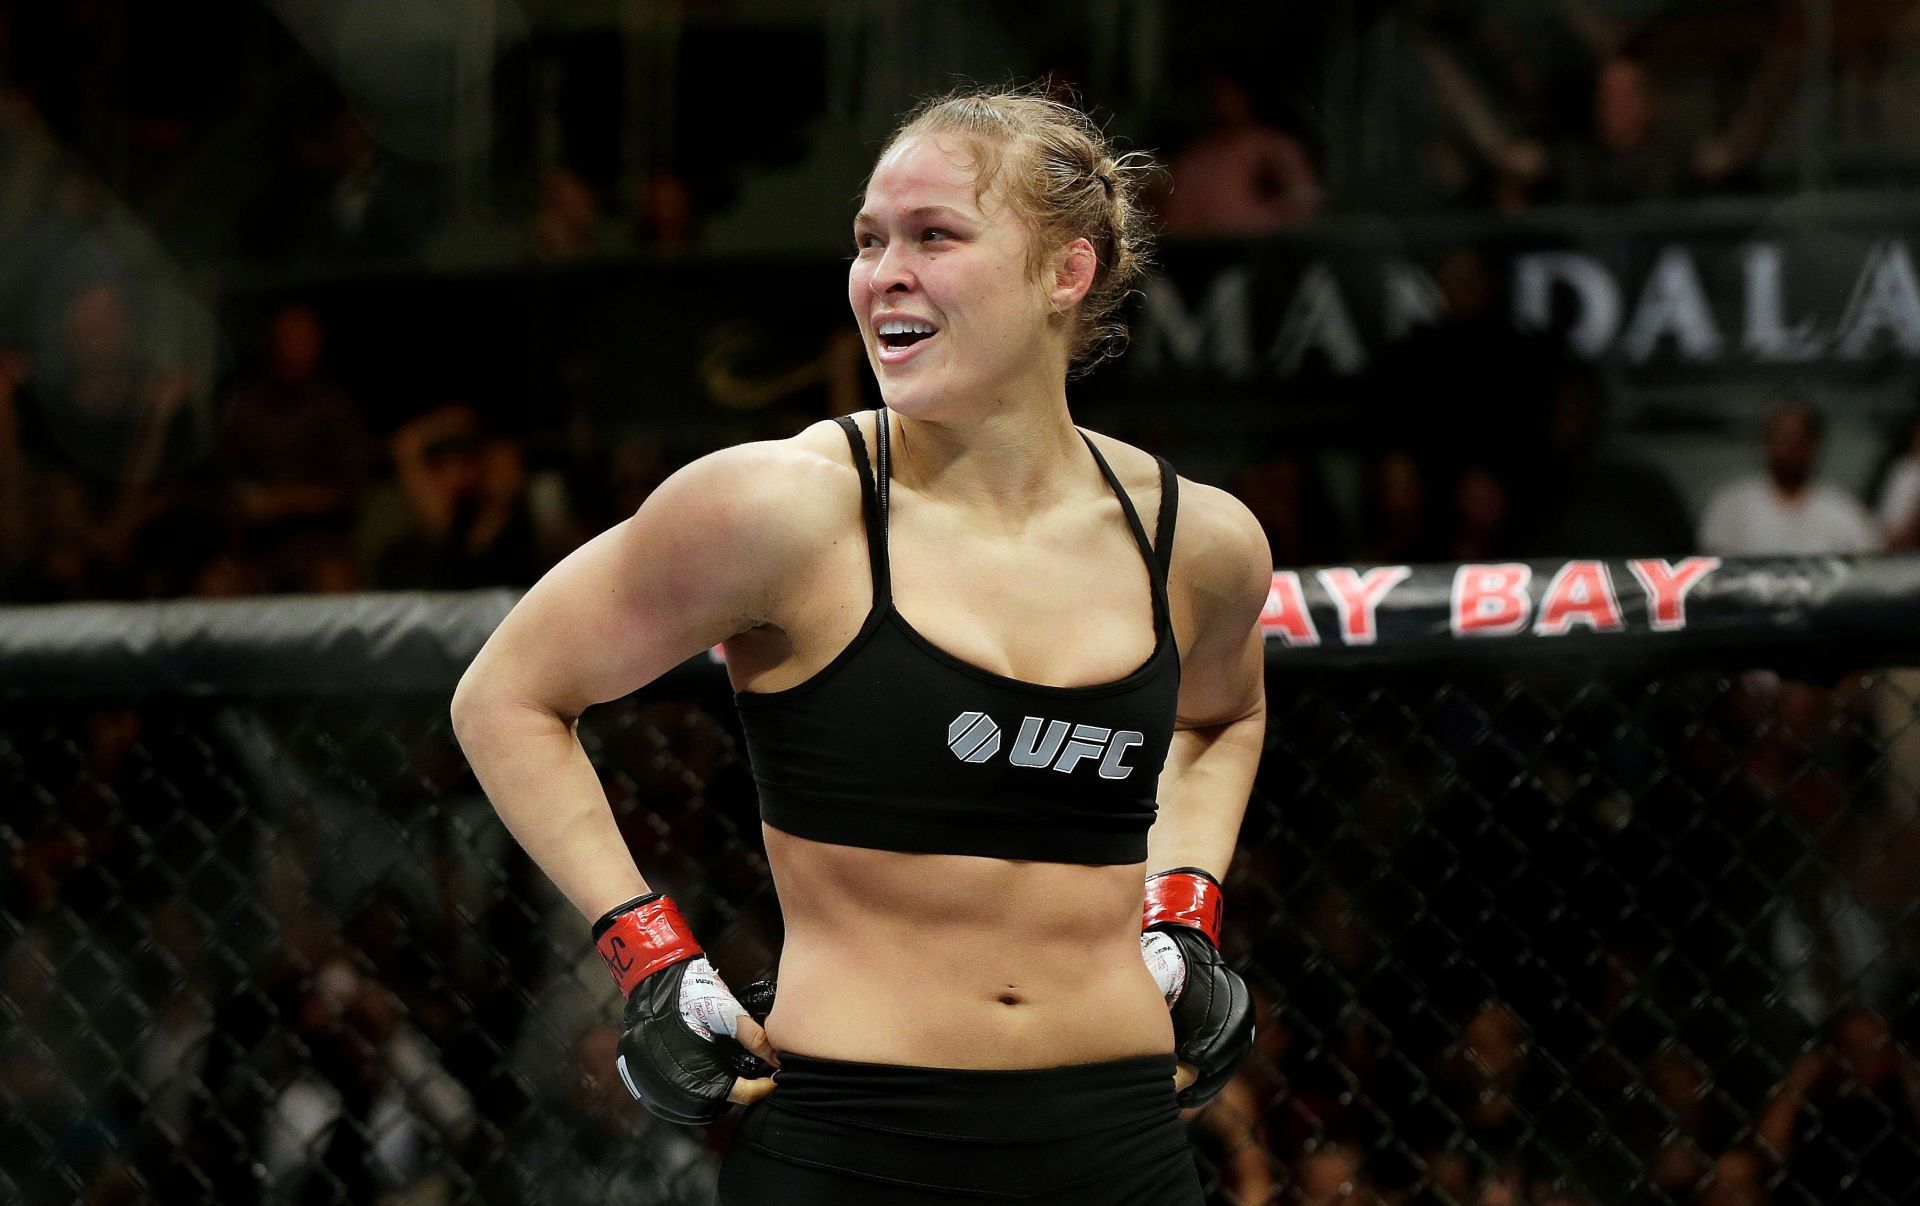 Ronda Rousey has had a stellar career in the UFC